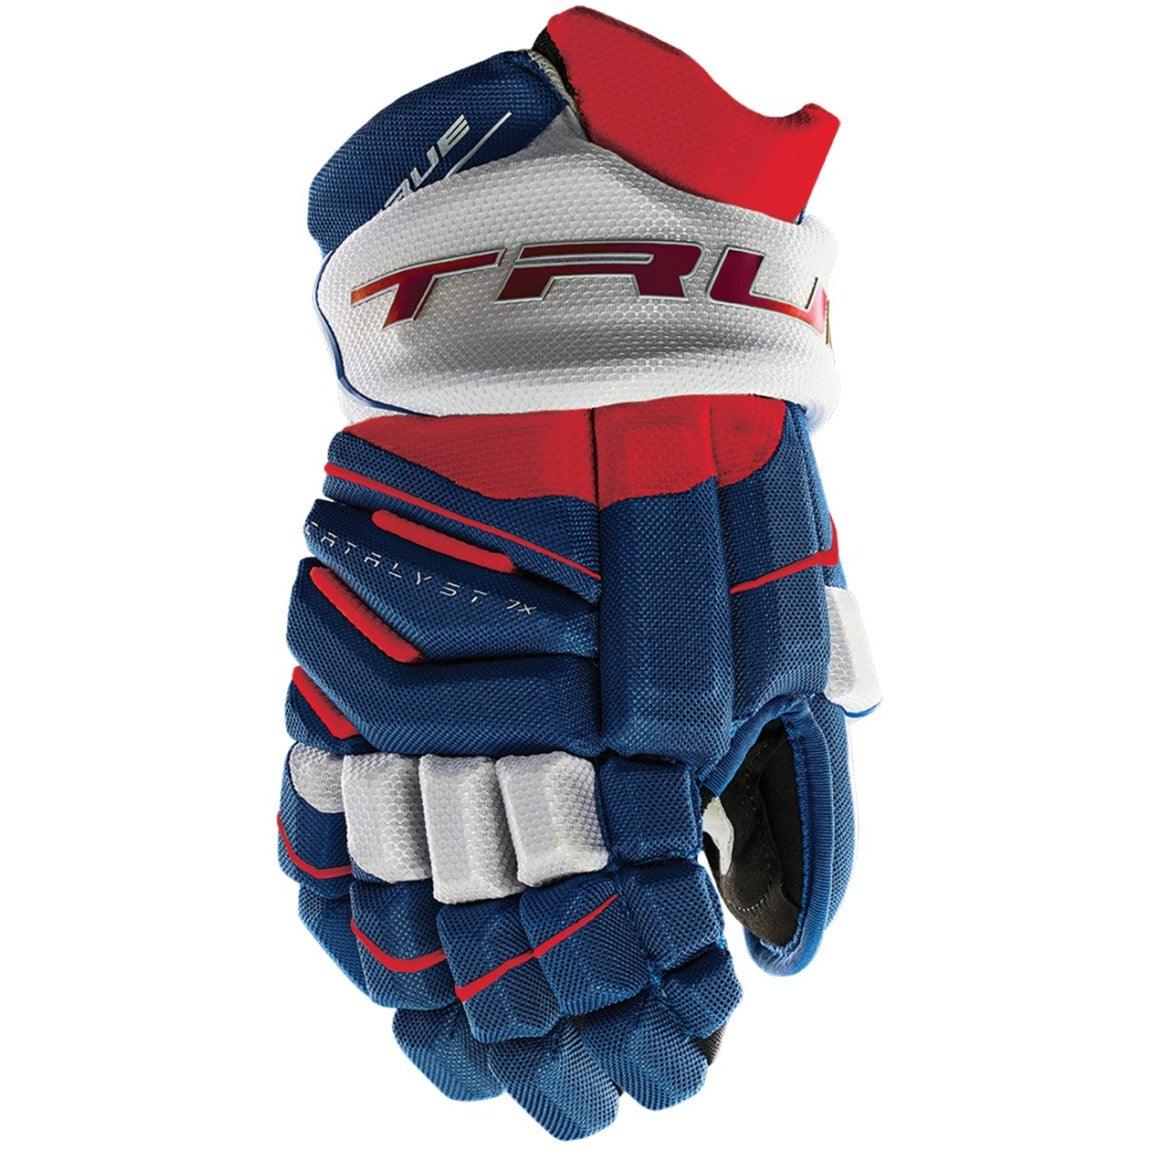 CATALYST 7 Tapered Glove - Sports Excellence